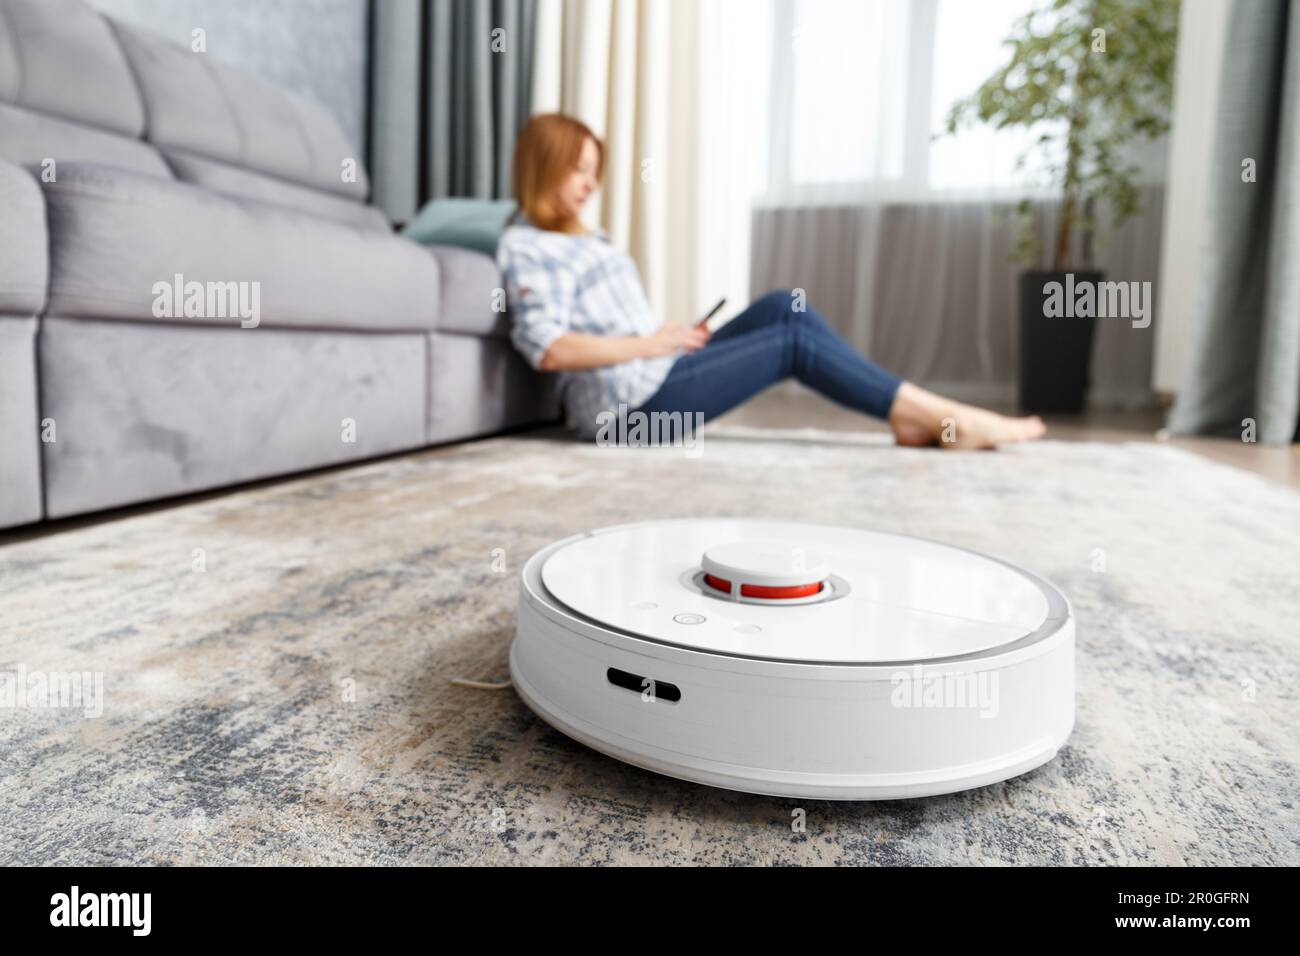 The girl is sitting in the living room and controls the robot vacuum cleaner using a smartphone. Smart House. The concept of smart home appliances Stock Photo